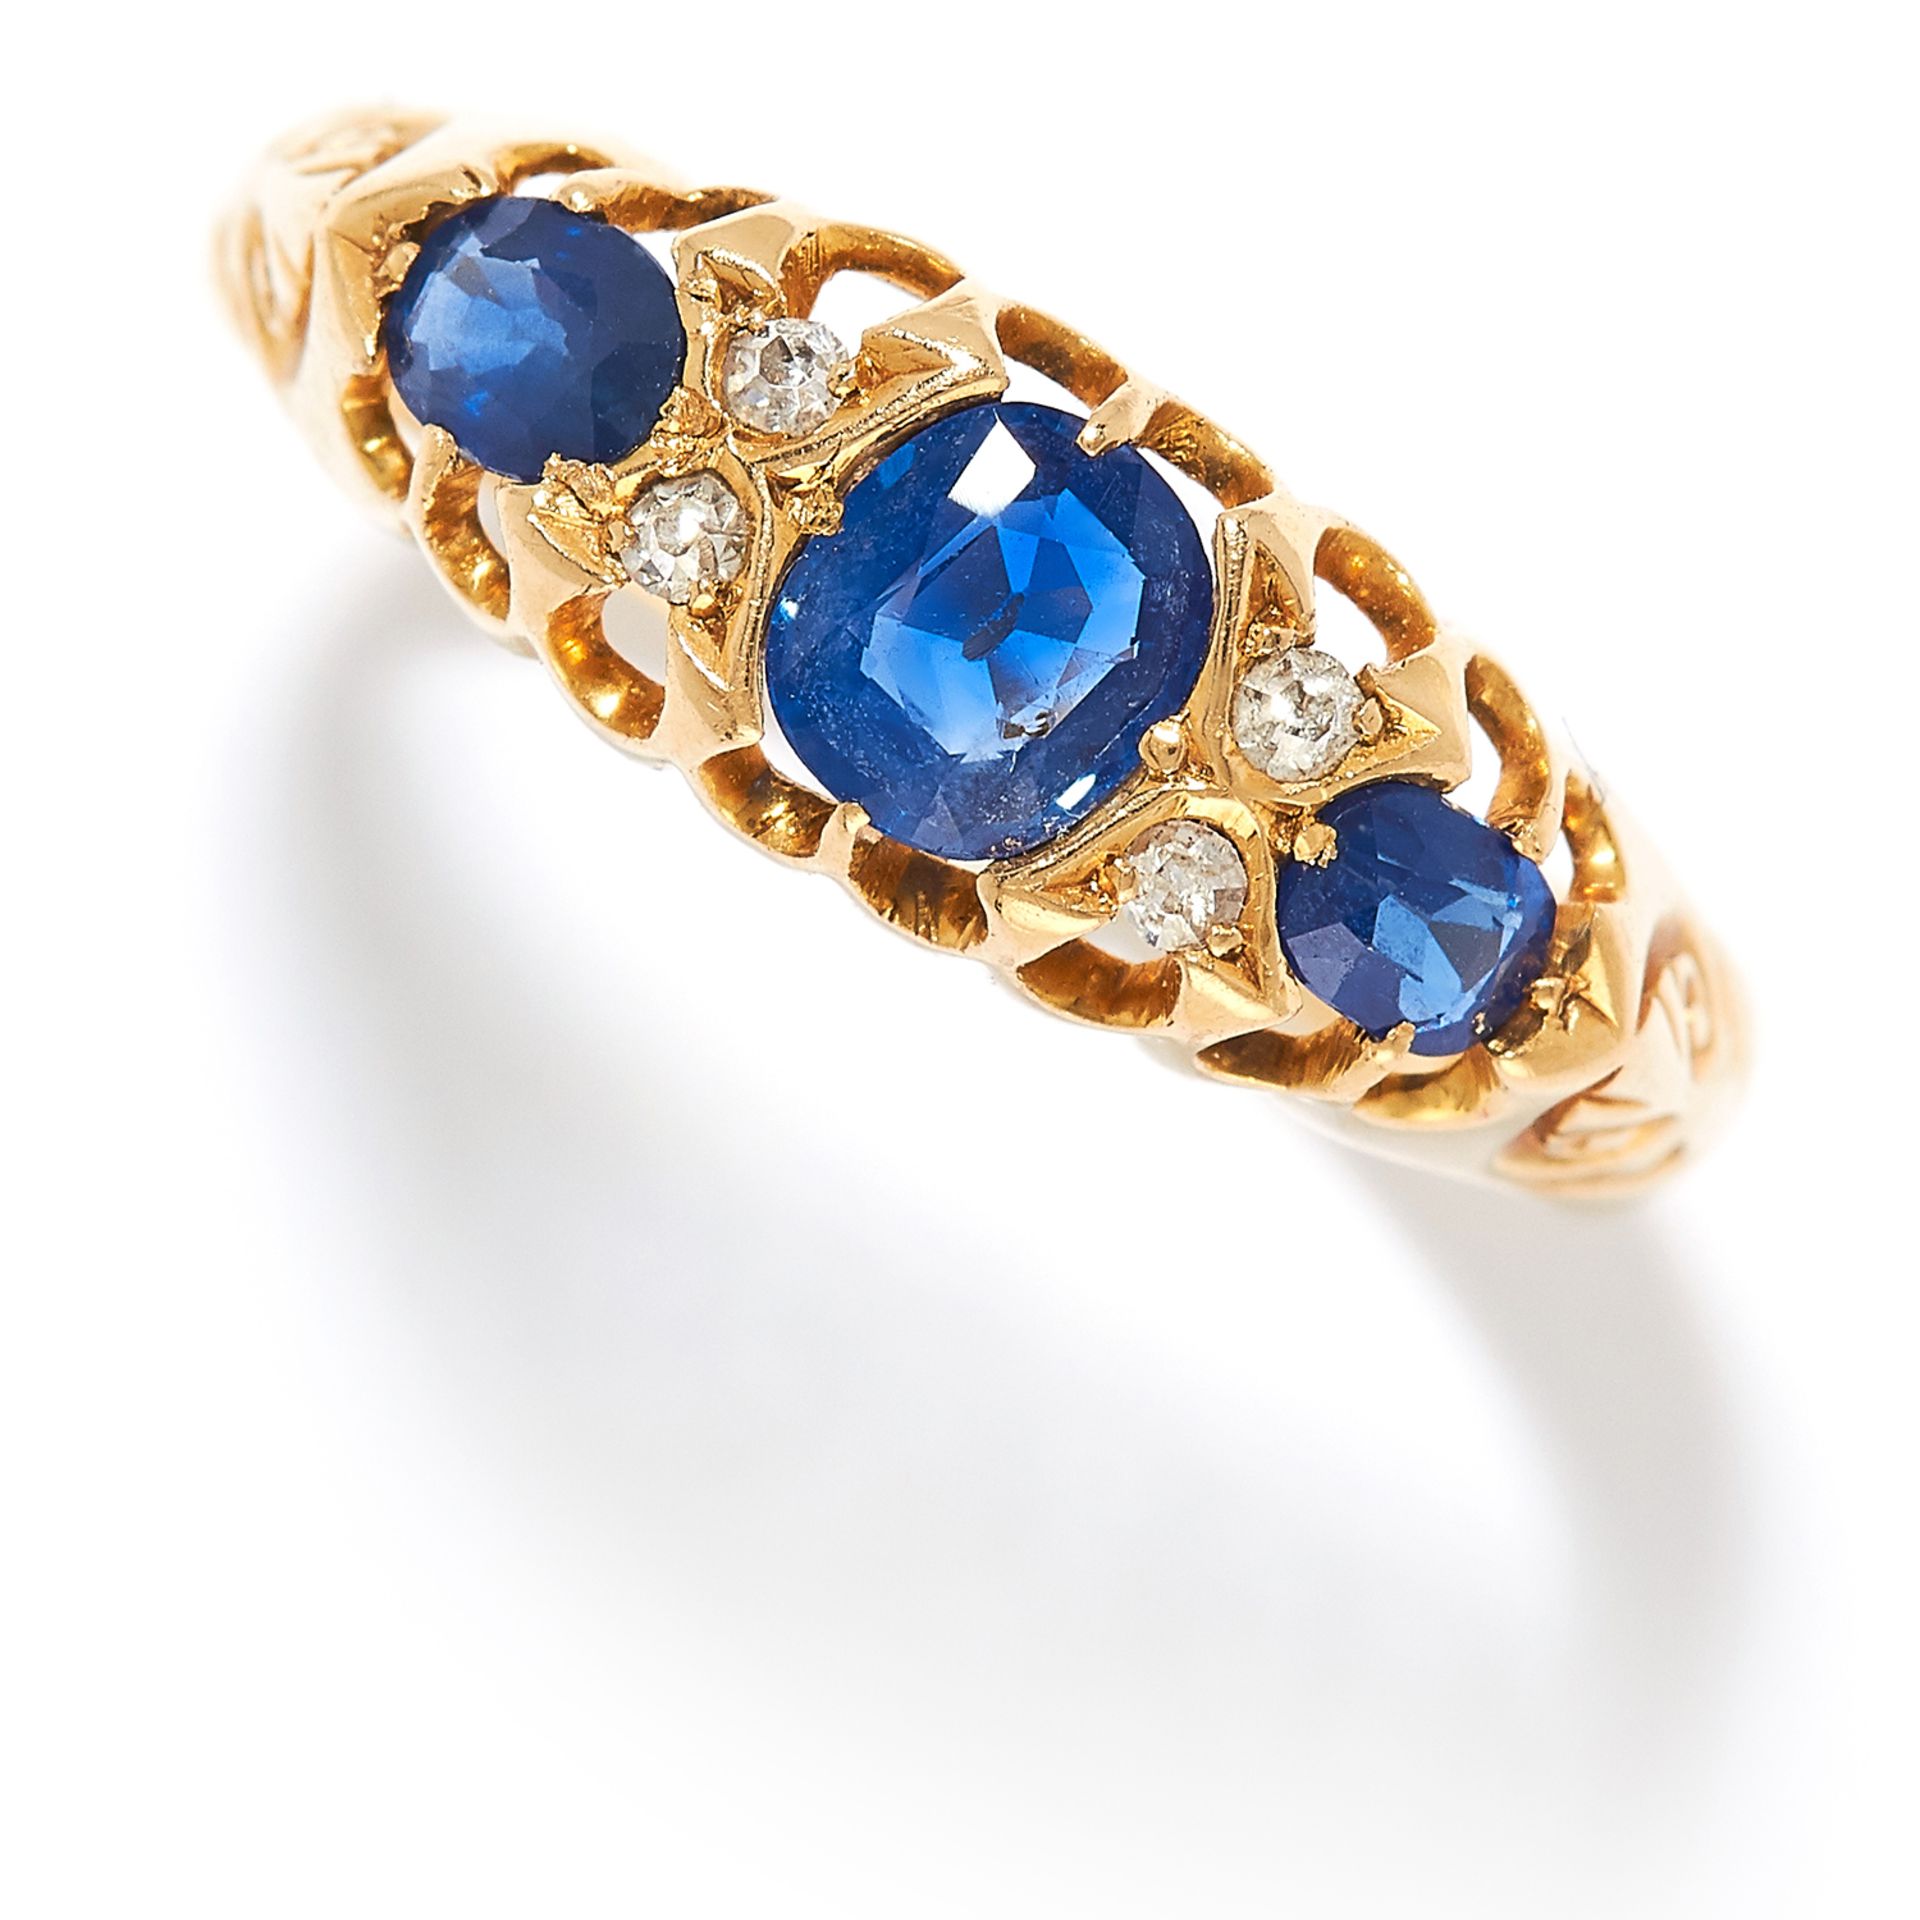 ANTIQUE SAPPHIRE AND DIAMOND RING in 18ct yellow gold, set with a trio of graduated sapphires